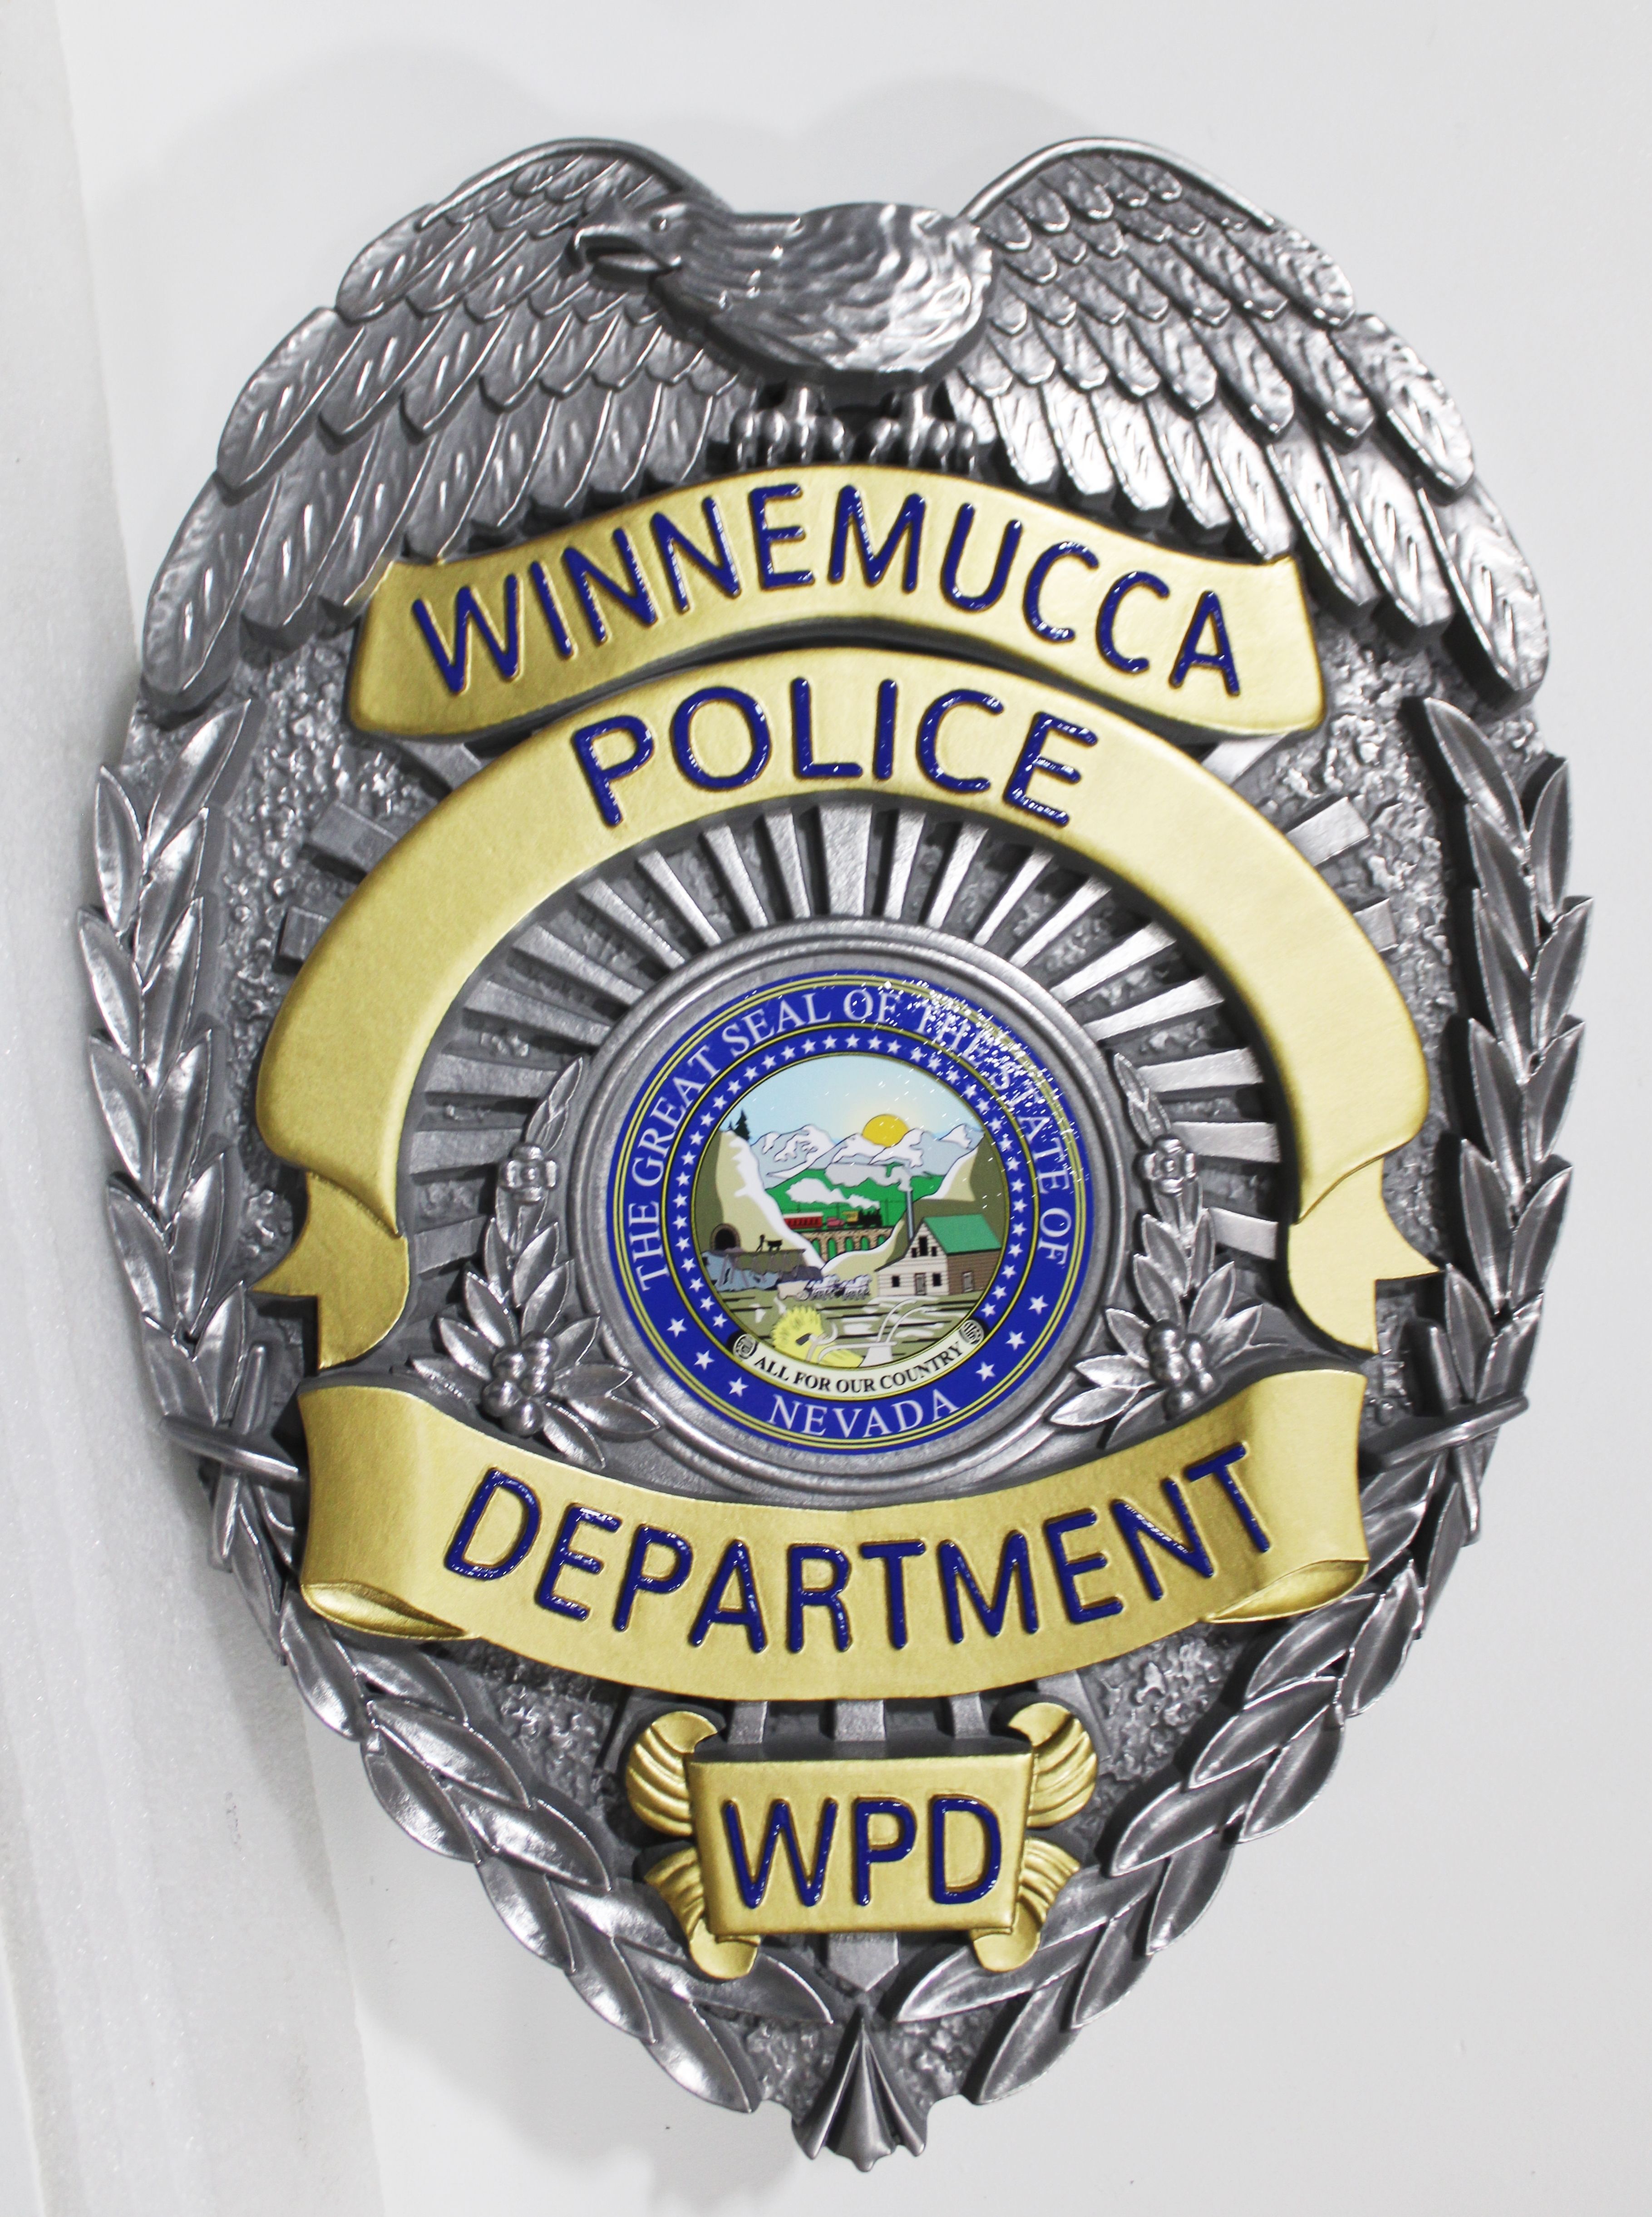 PP-1518 - Carved  3-D Bas-relief Plaque of the Badge of a Police Officer,  Winnemucca Police Department, Nevada